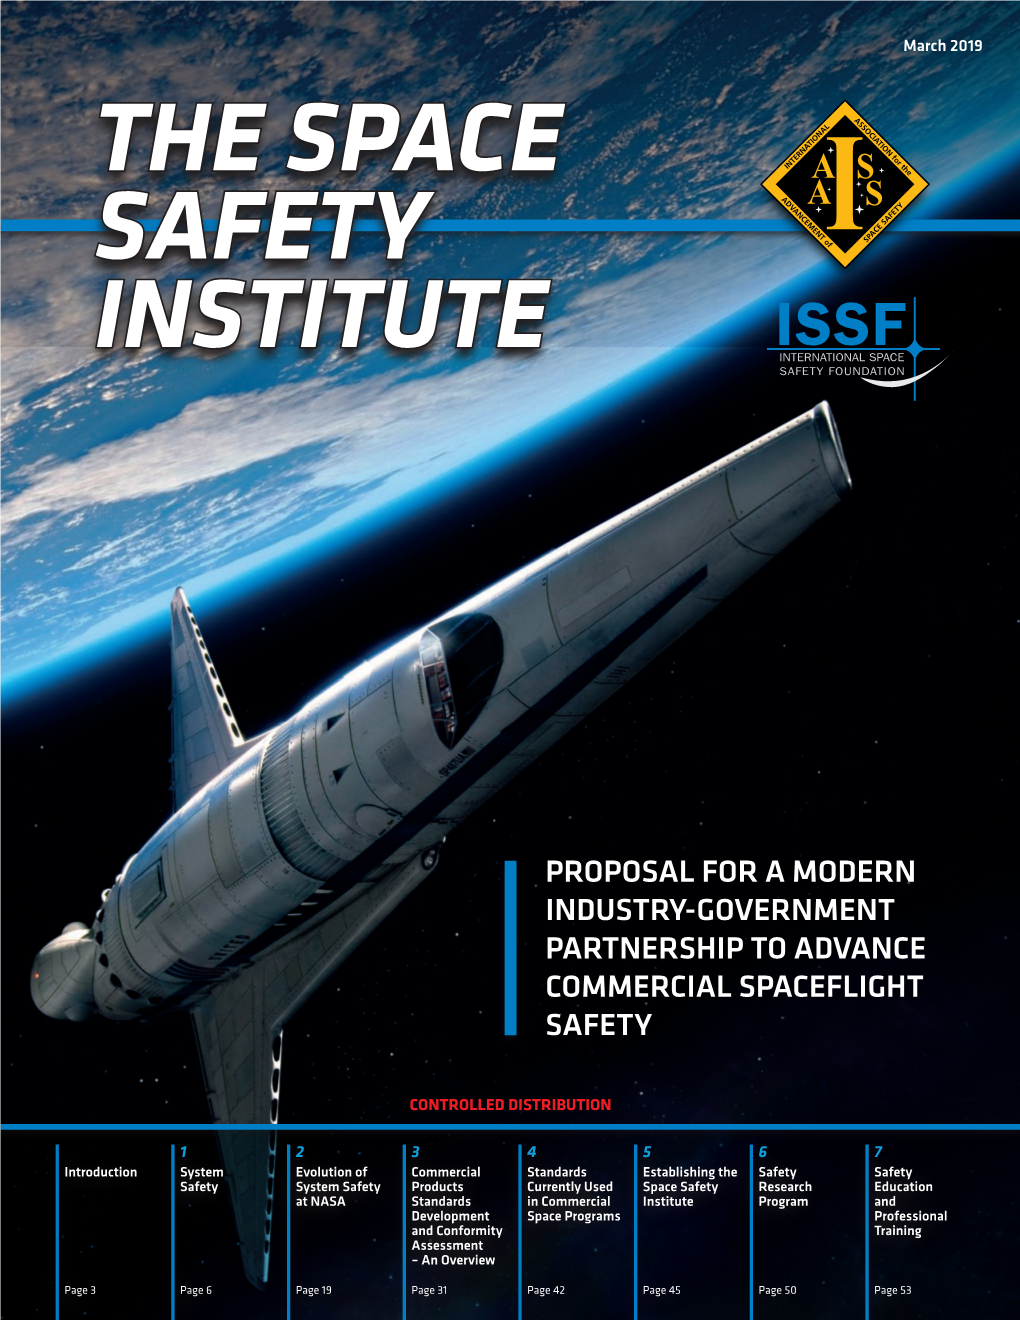 Proposal for a Modern Industry-Government Partnership to Advance Commercial Spaceflight Safety